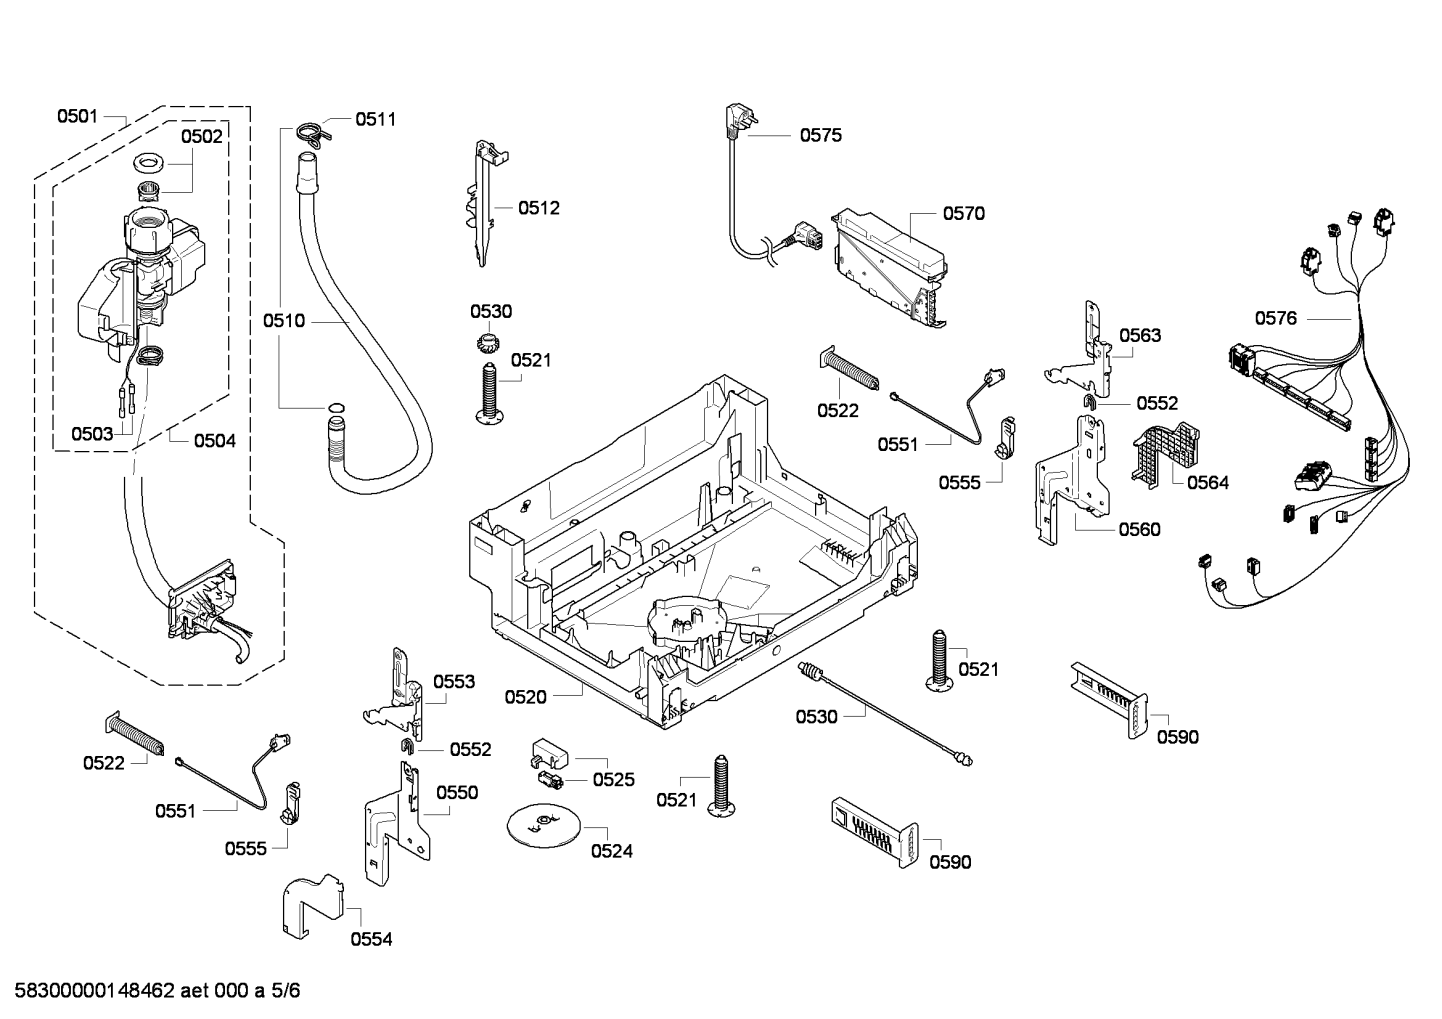 drawing_link_5_device_1578649